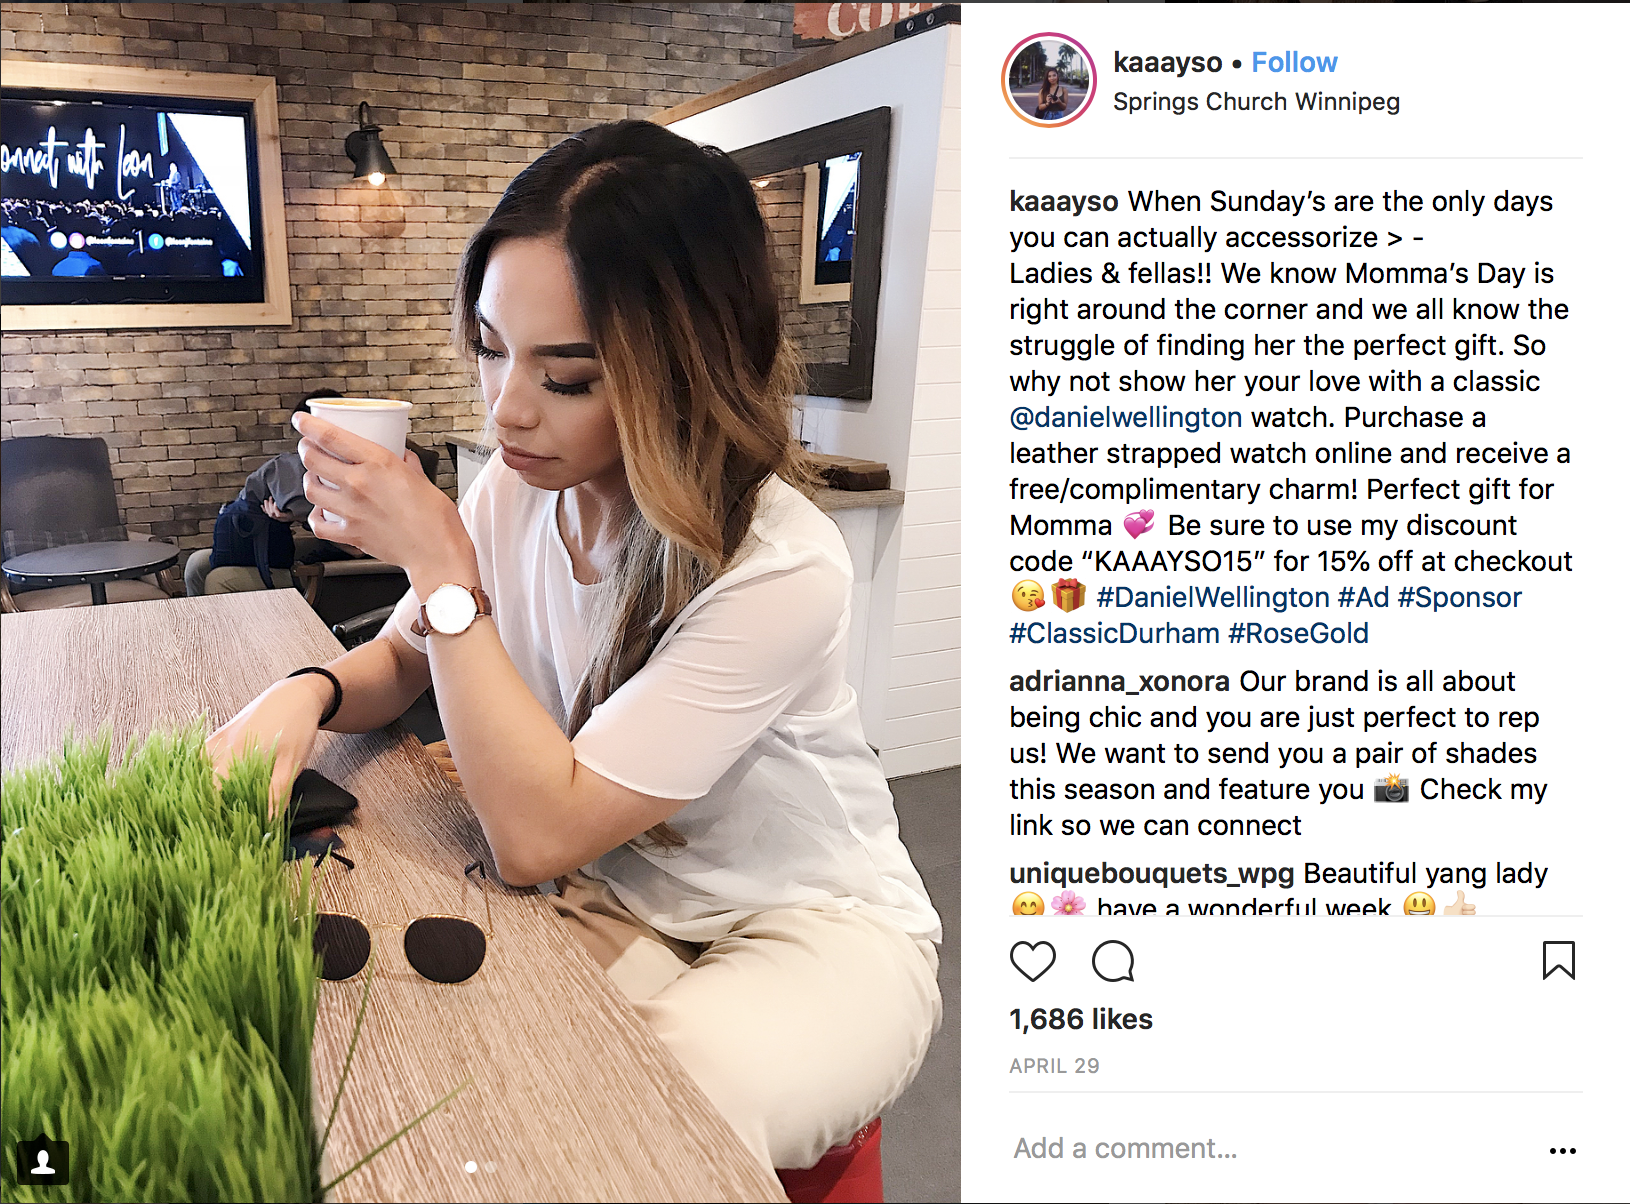 micro-influencers-get-better-engagement